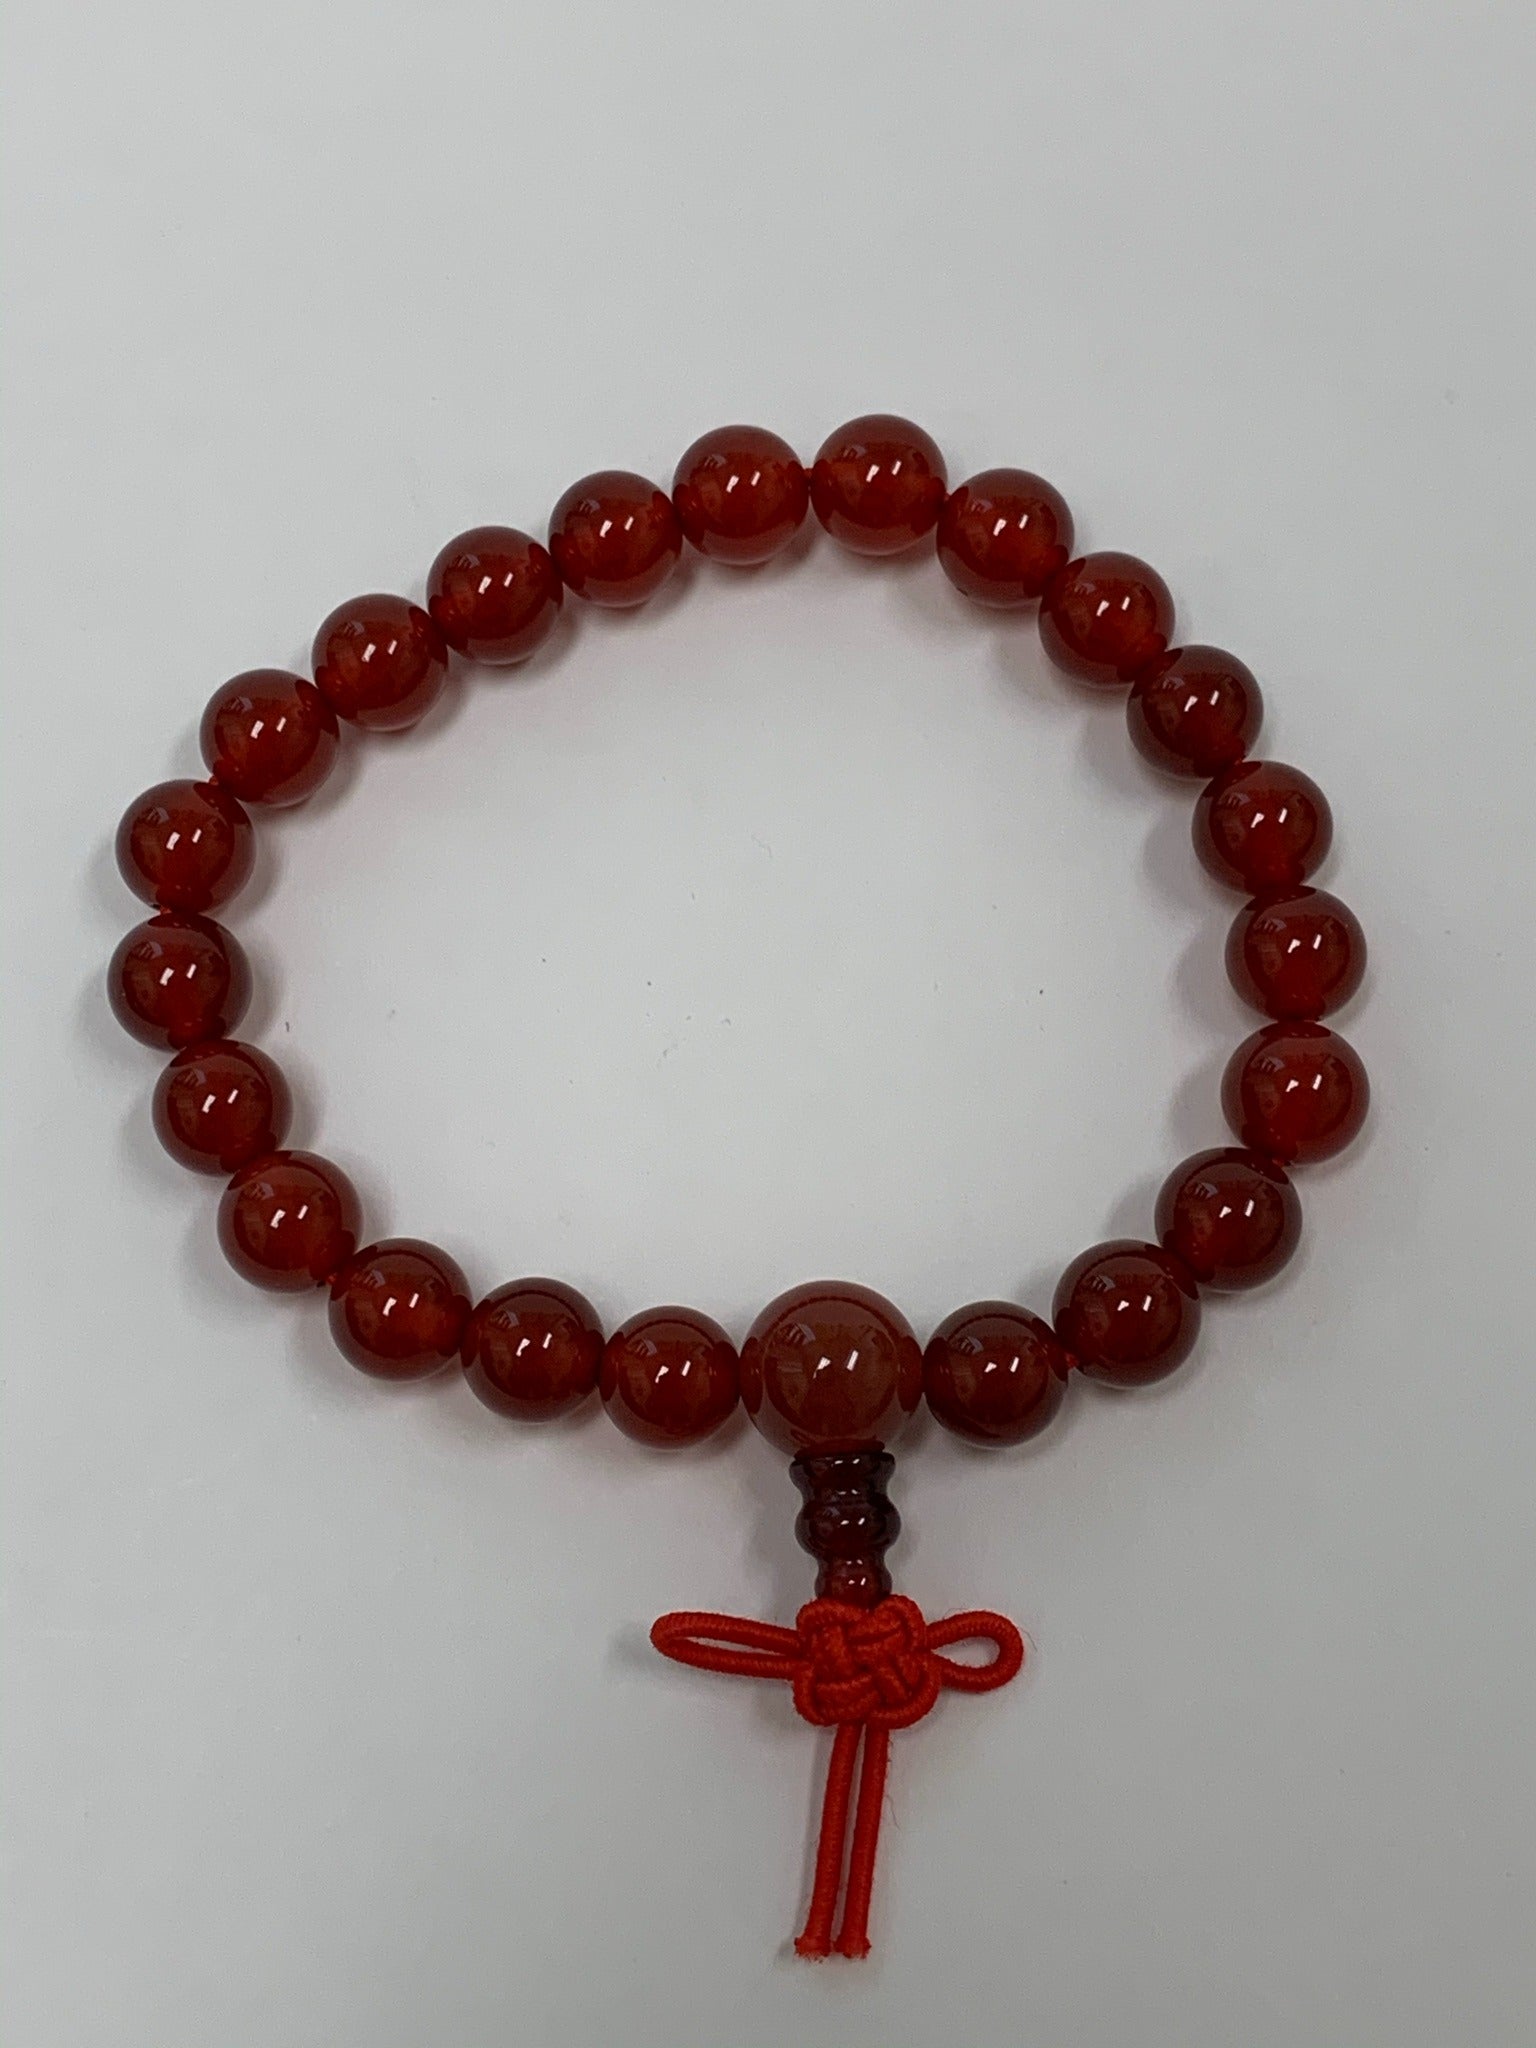 Close-up view. Carnelian power bracelet accented with red Chinese tassel knot. Beads are 8 mm. Carnelian promotes courage, creativity, vitality and dispels emotional negativity.